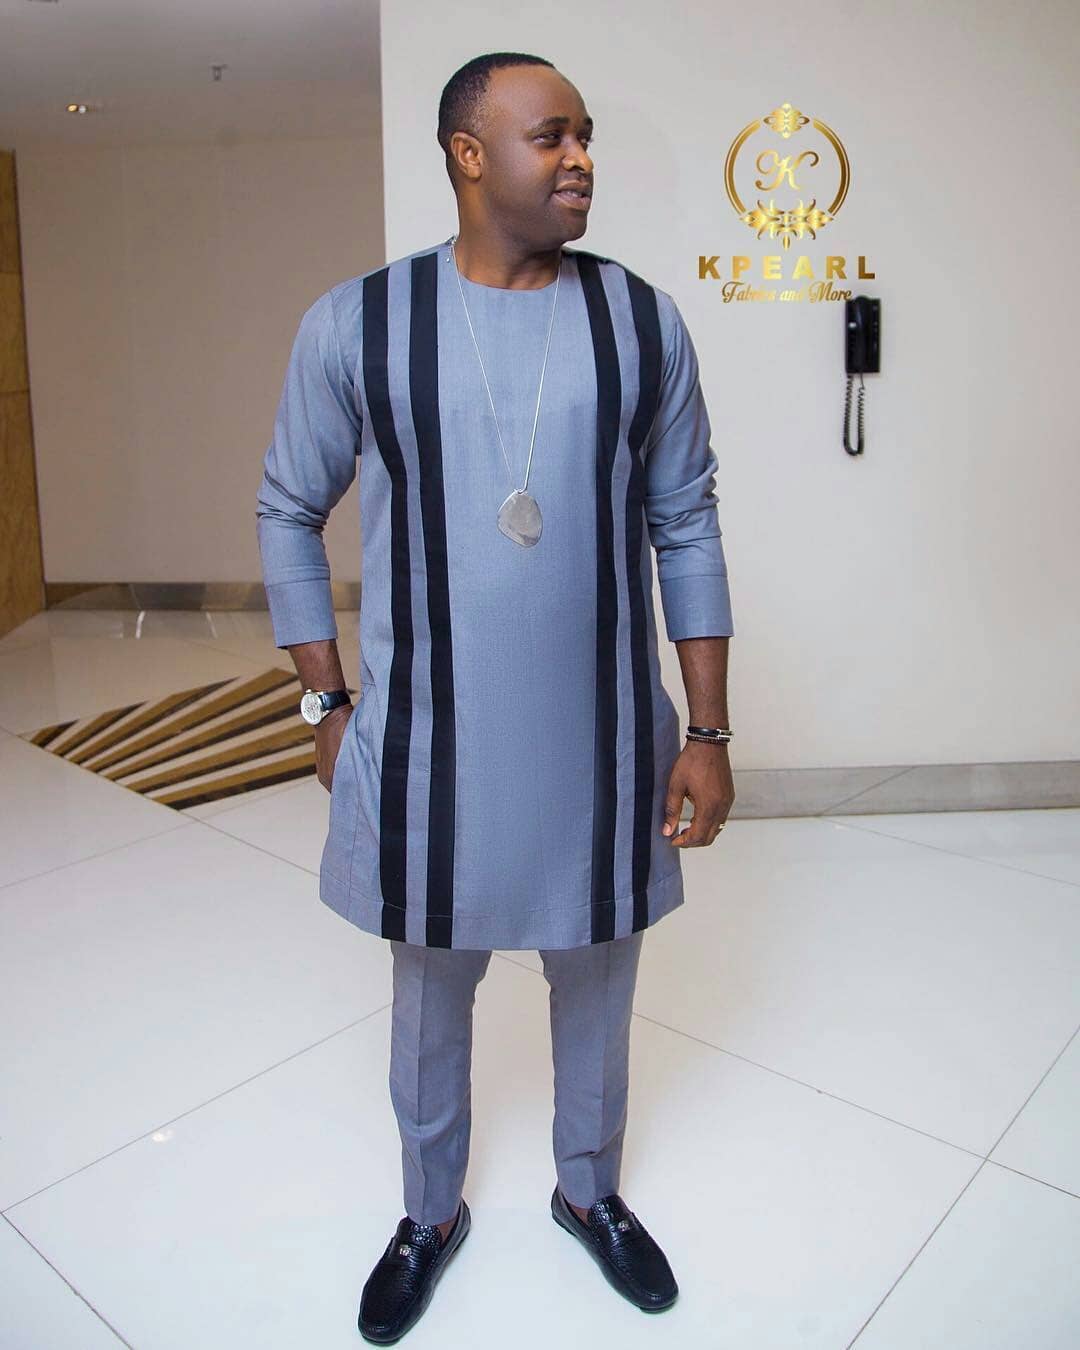 Actor Femi Adebayo Steps Out In Style, Looking So Elegant In New Native ...